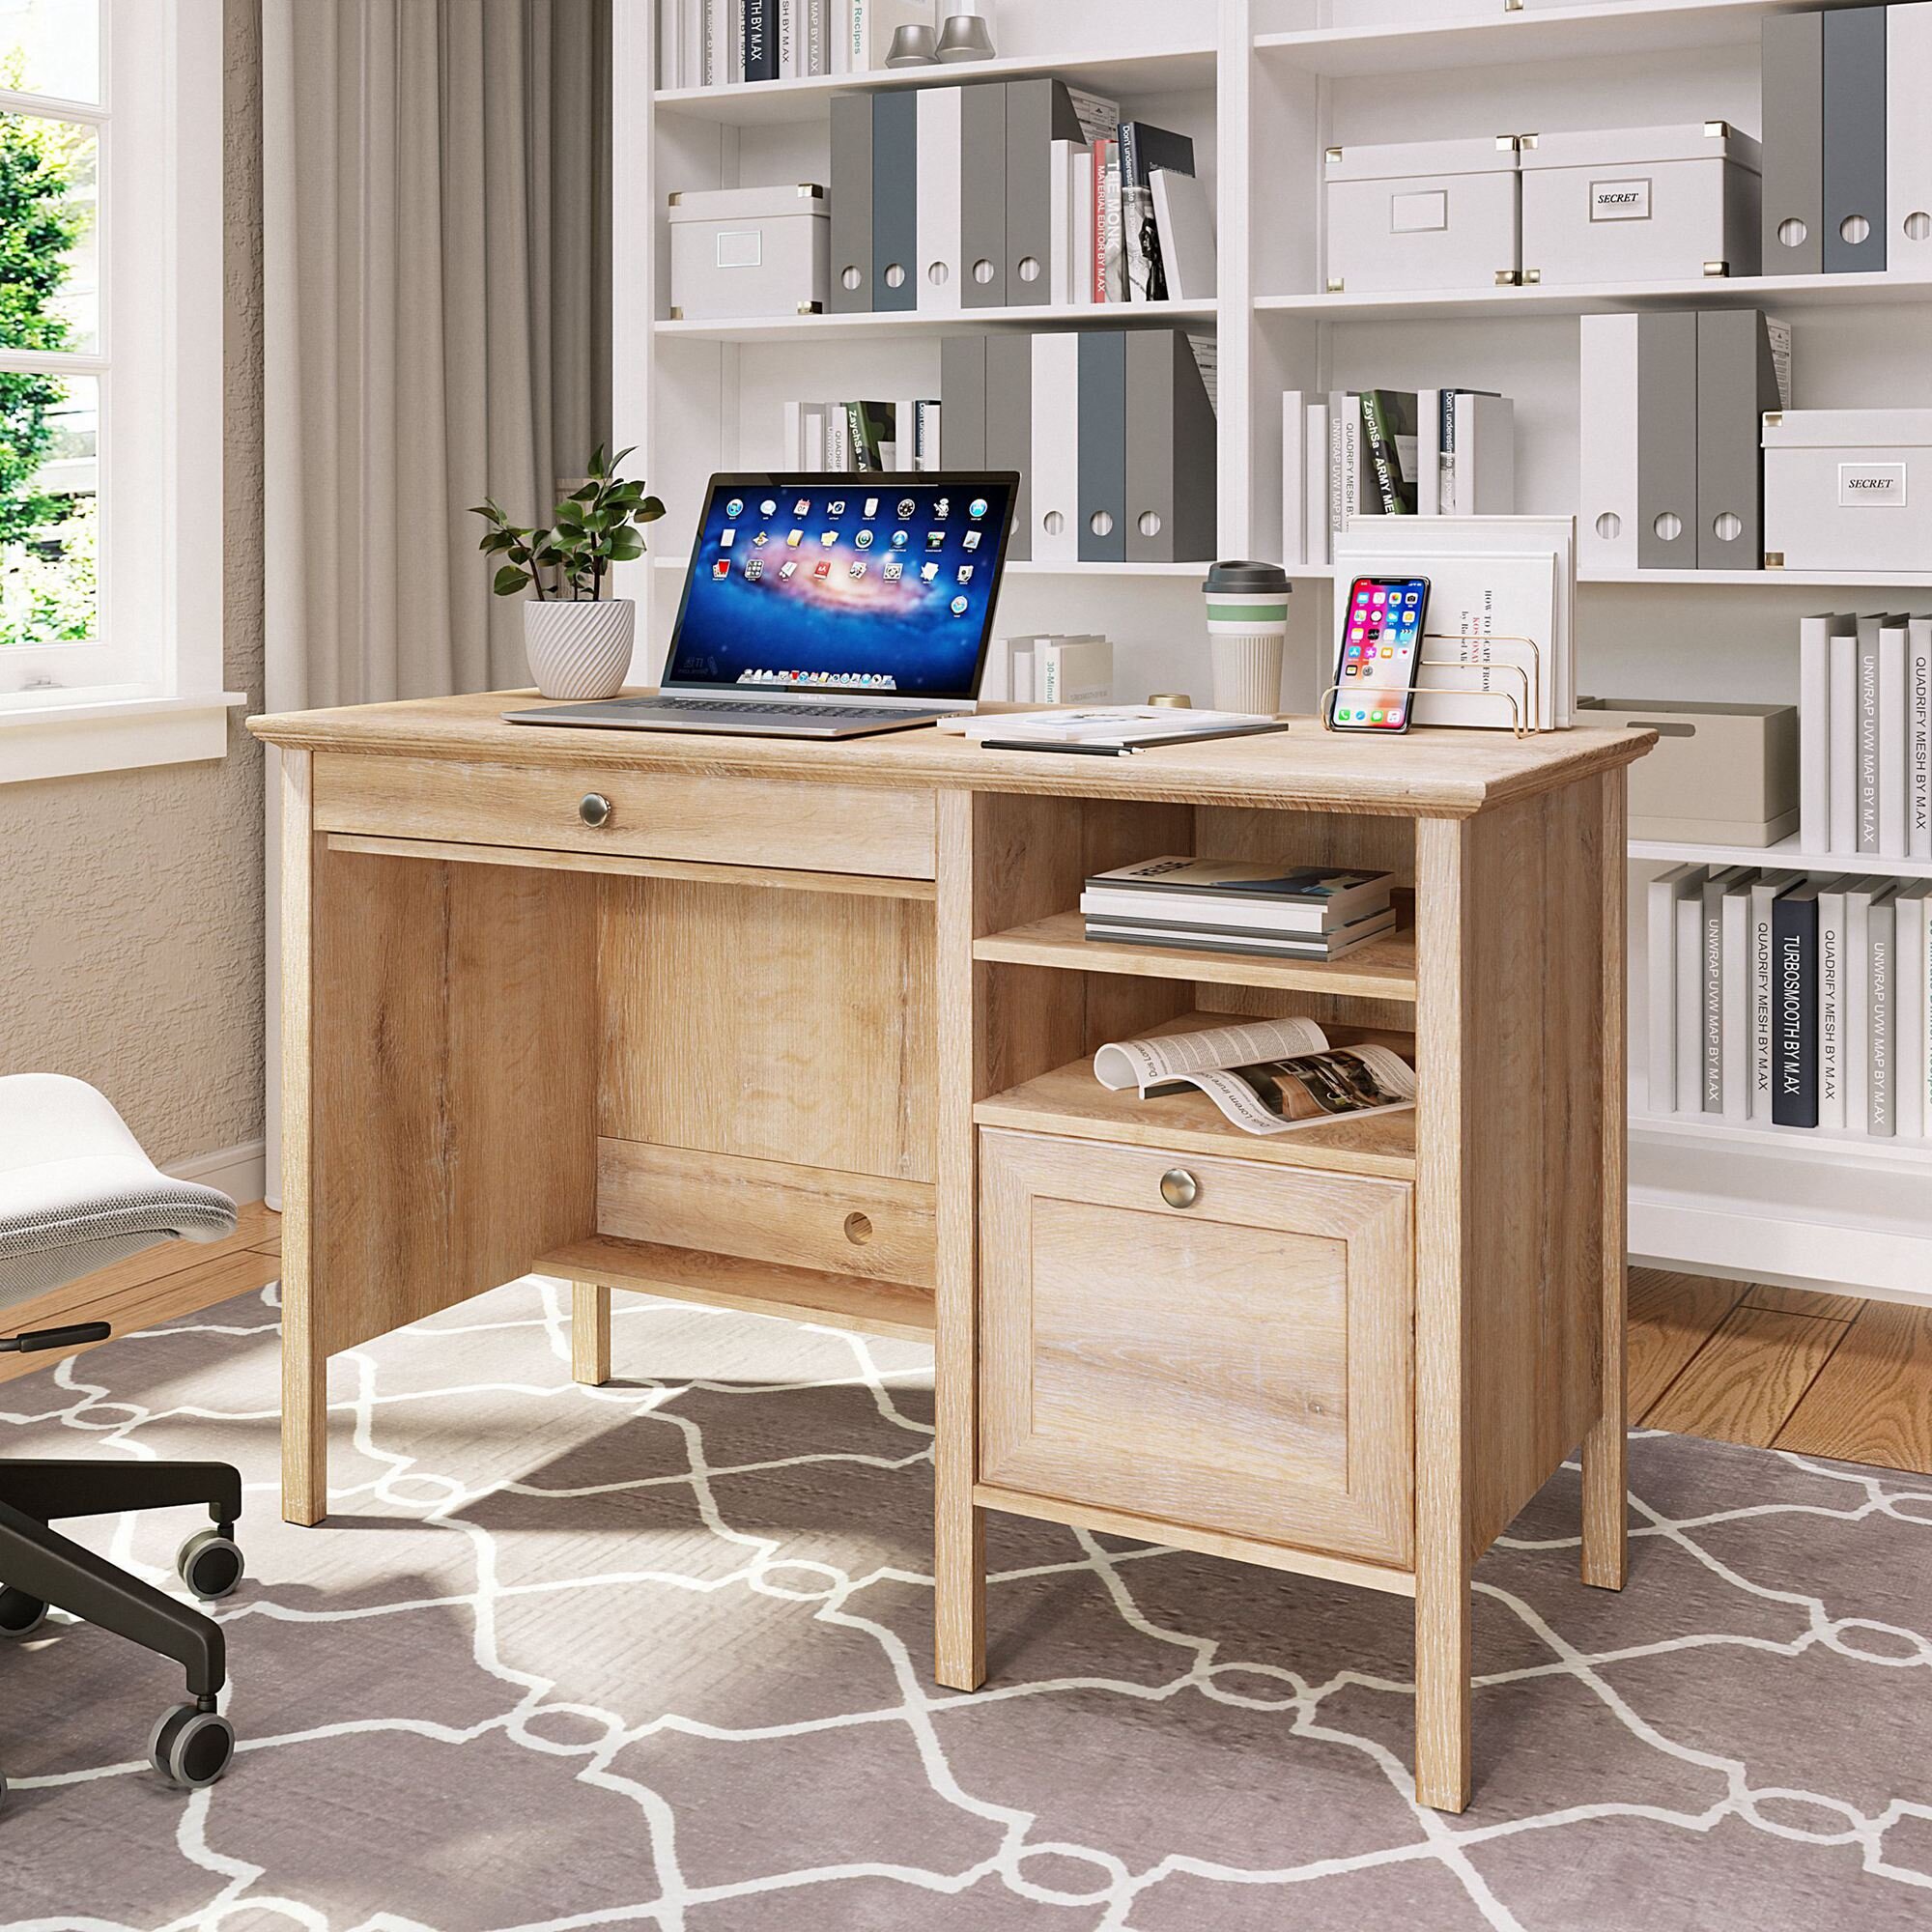 Modern Small Spaces PC Laptop Table Home Office Computer Desk Study Writing Desk 